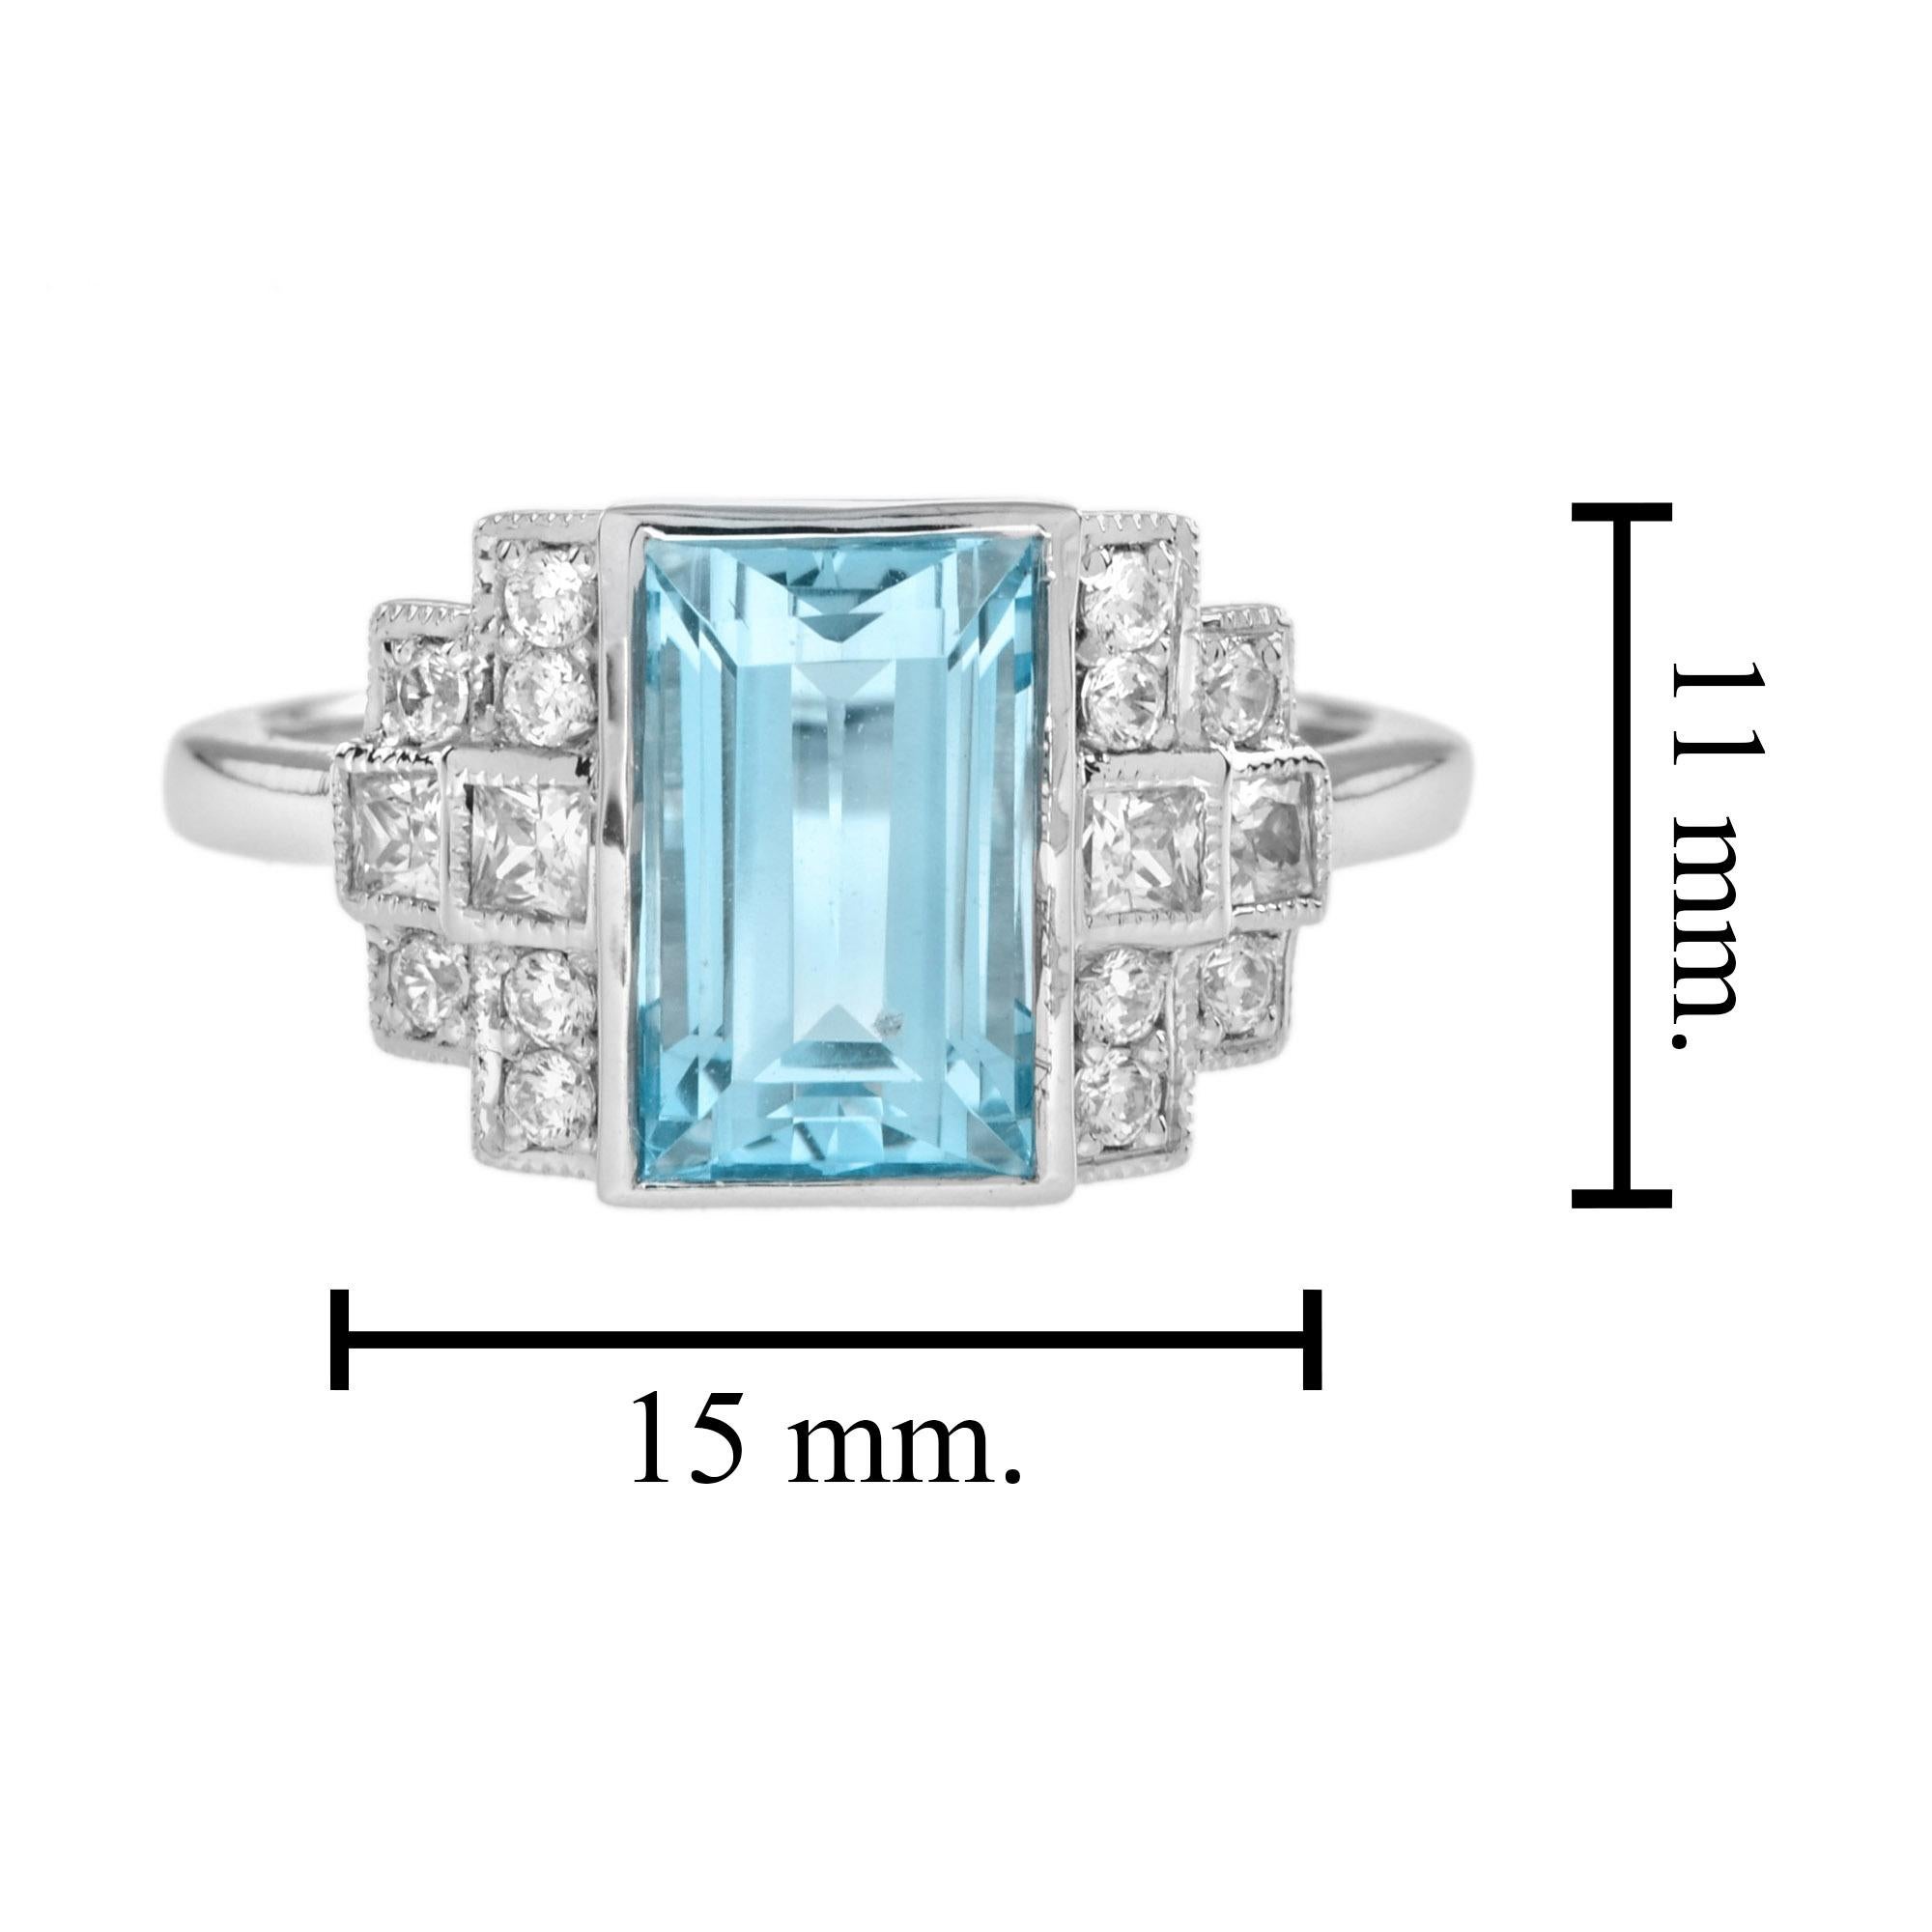 3.50 Ct. Aquamarine and Diamond Art Deco Style Cocktail Ring in 18K White Gold For Sale 2